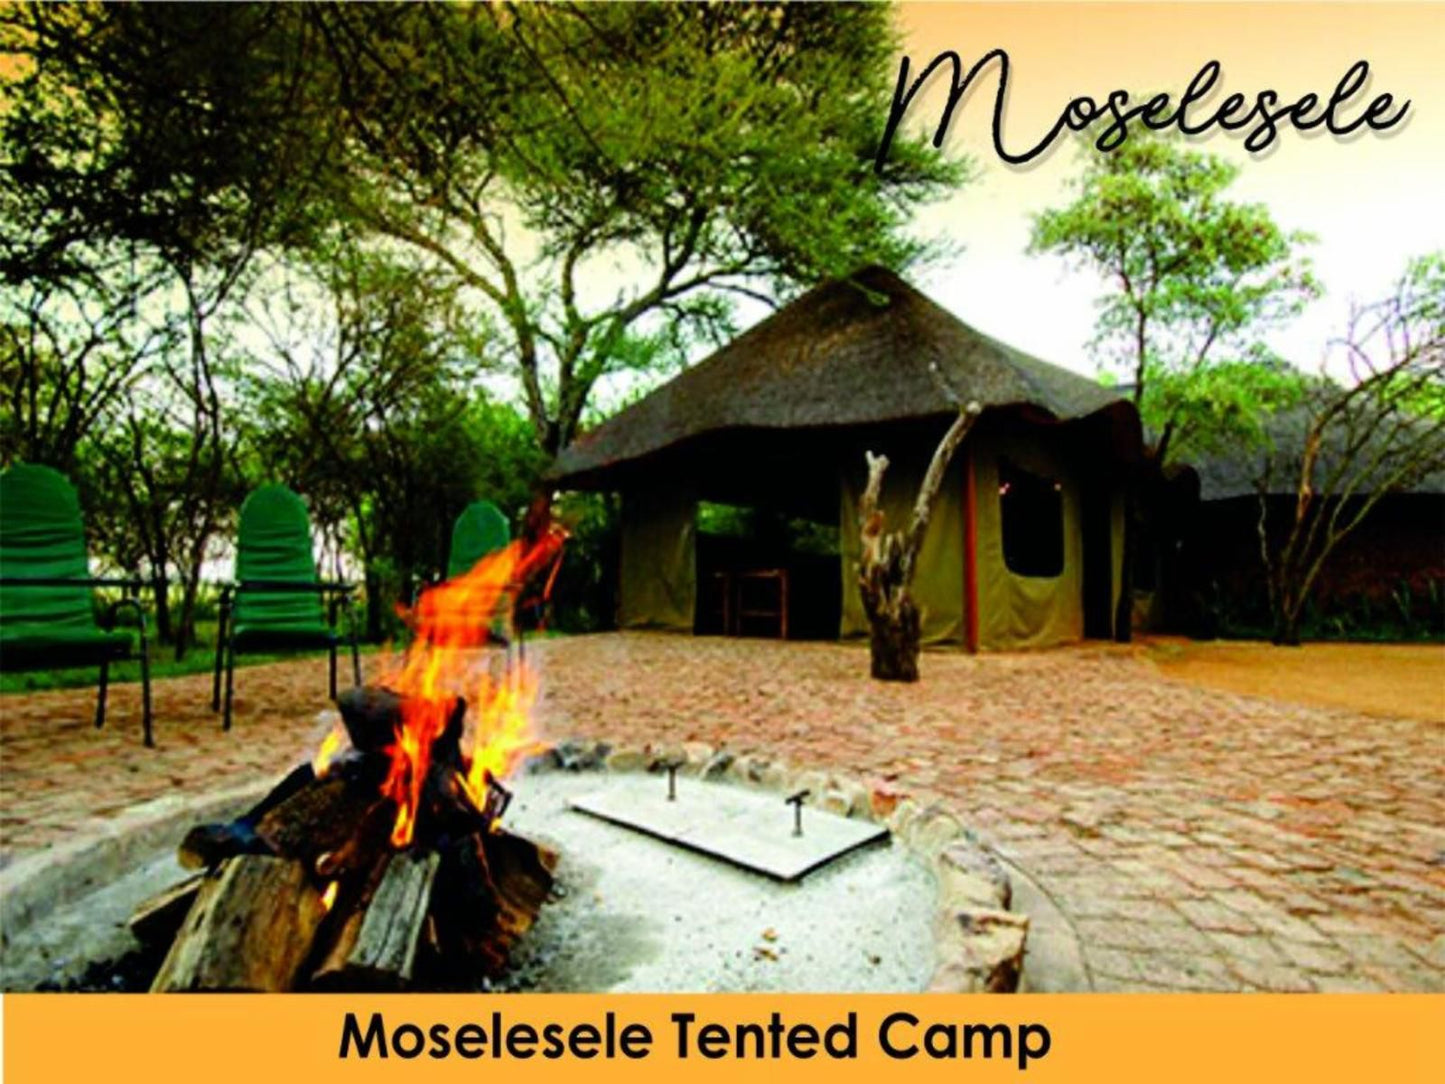 Sondela Nature Reserve And Spa Moselesele Tent Camp Bela Bela Warmbaths Limpopo Province South Africa Fire, Nature, Tent, Architecture